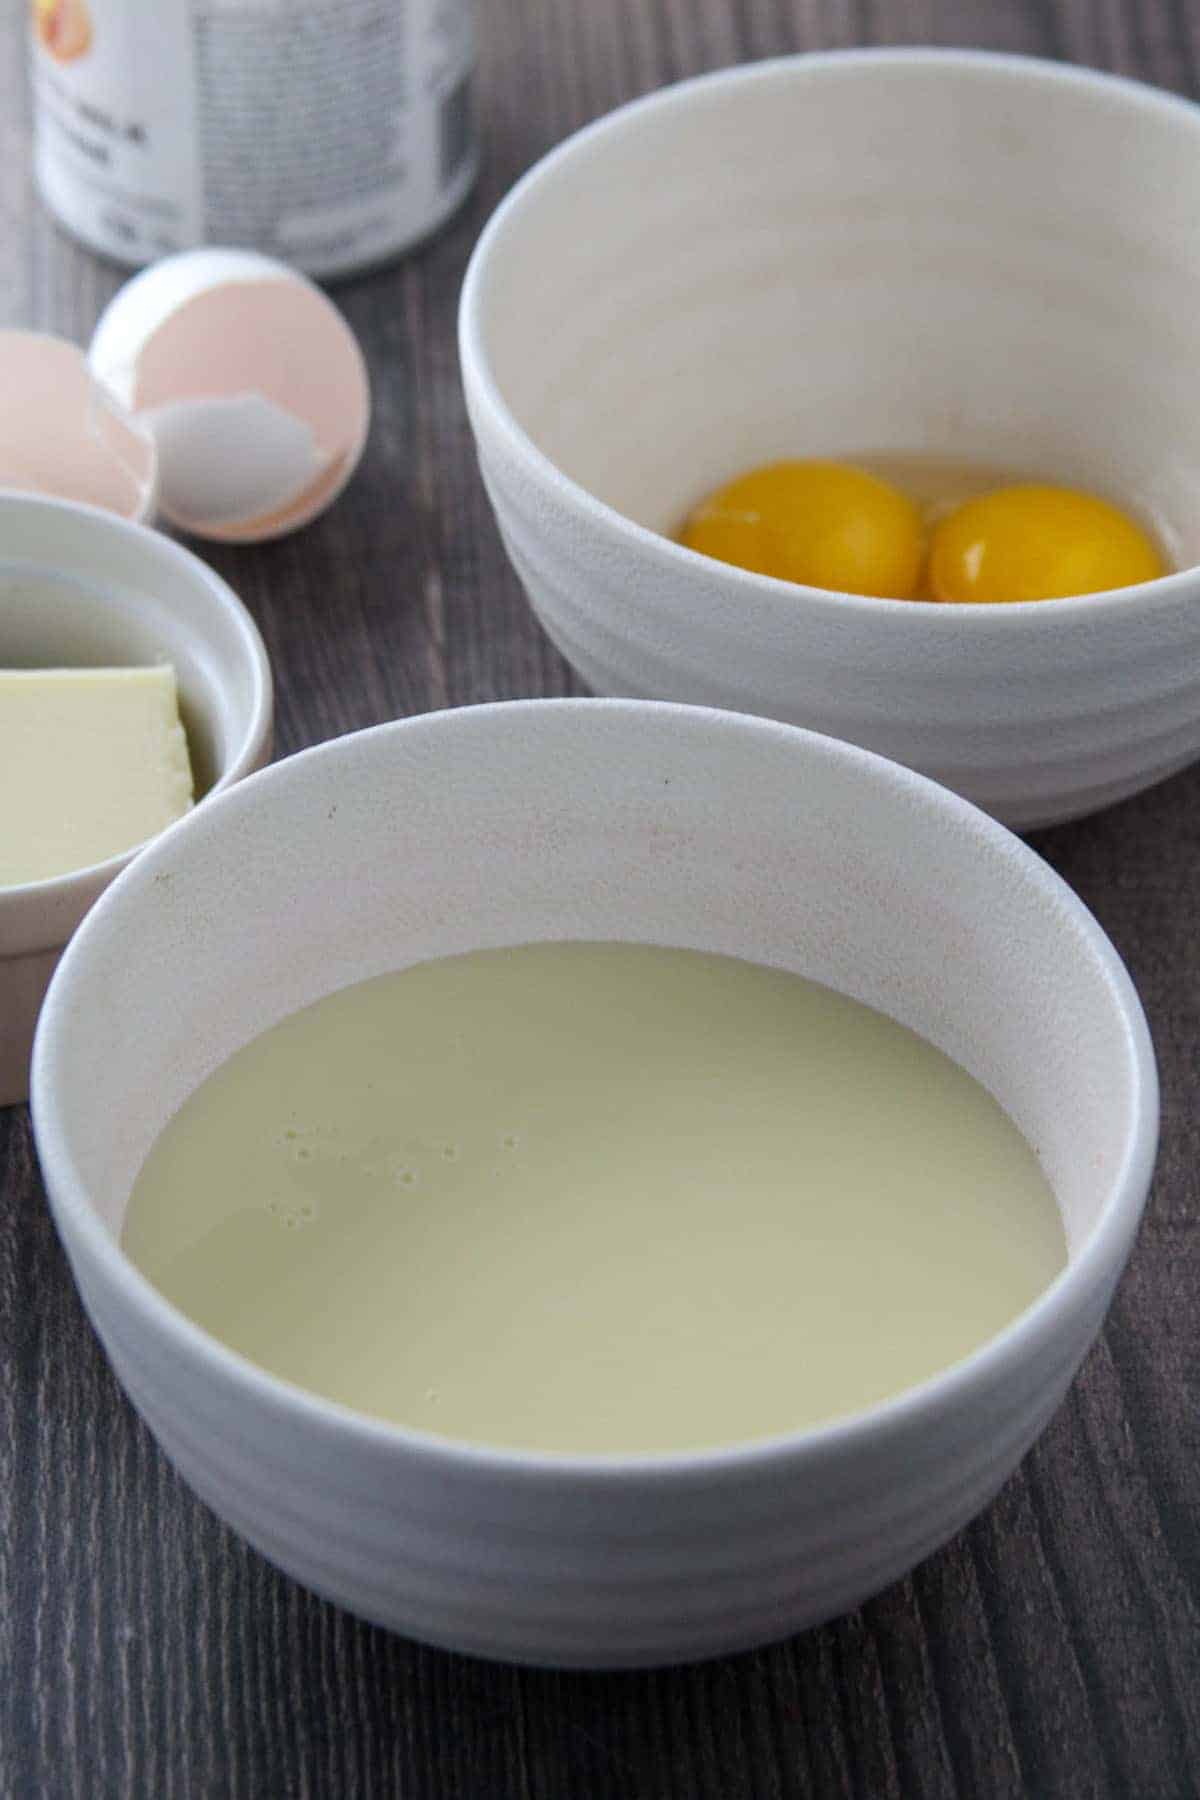 condensed milk, butter, and egg yolks in separate bowls